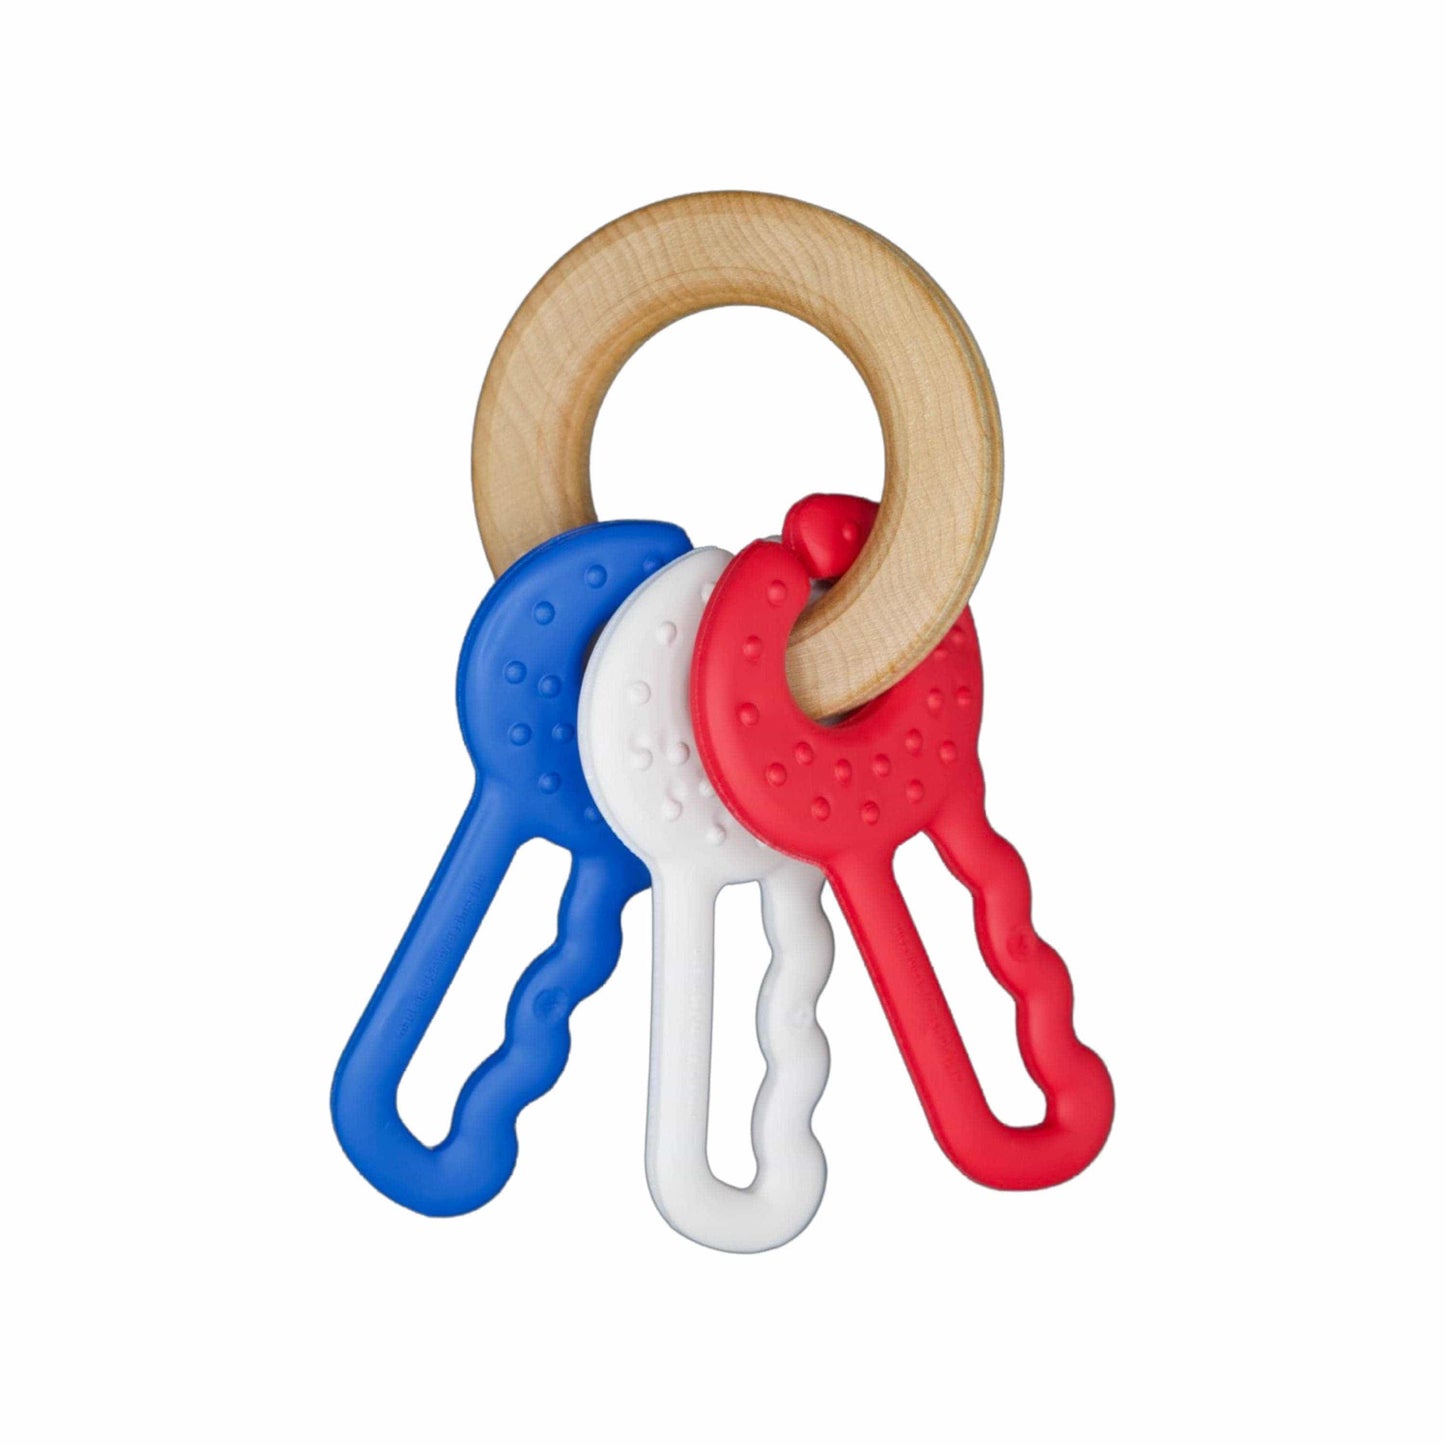 Green Keys Clutching & Teething Toy - Red, White & Blue NEW!